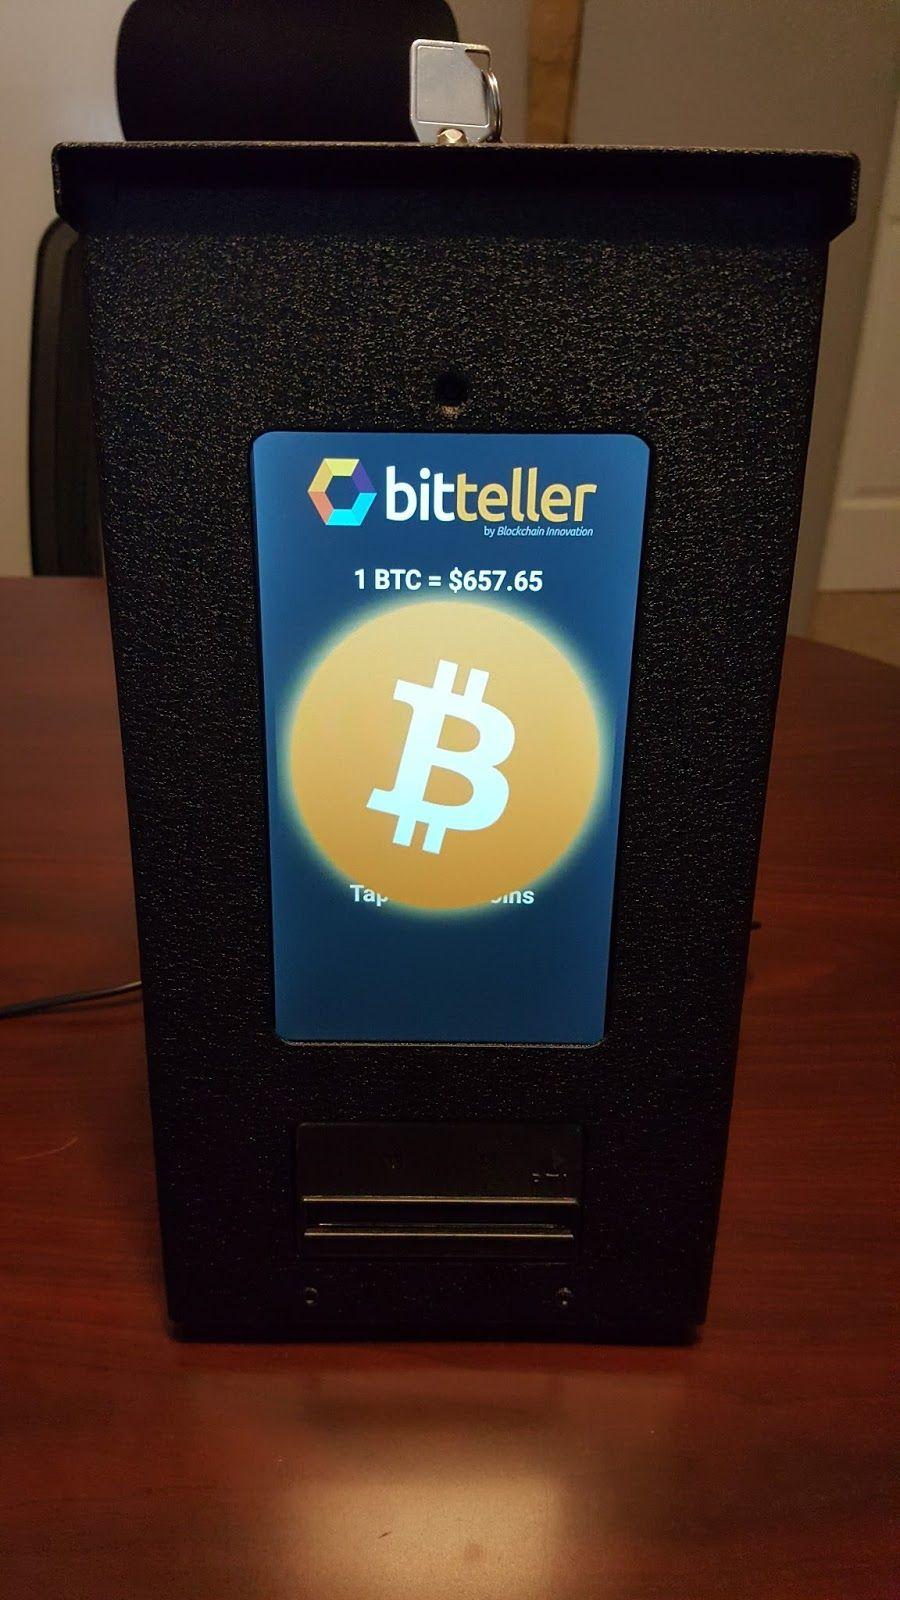 to return to service. How do I purchase coin using bitteller?